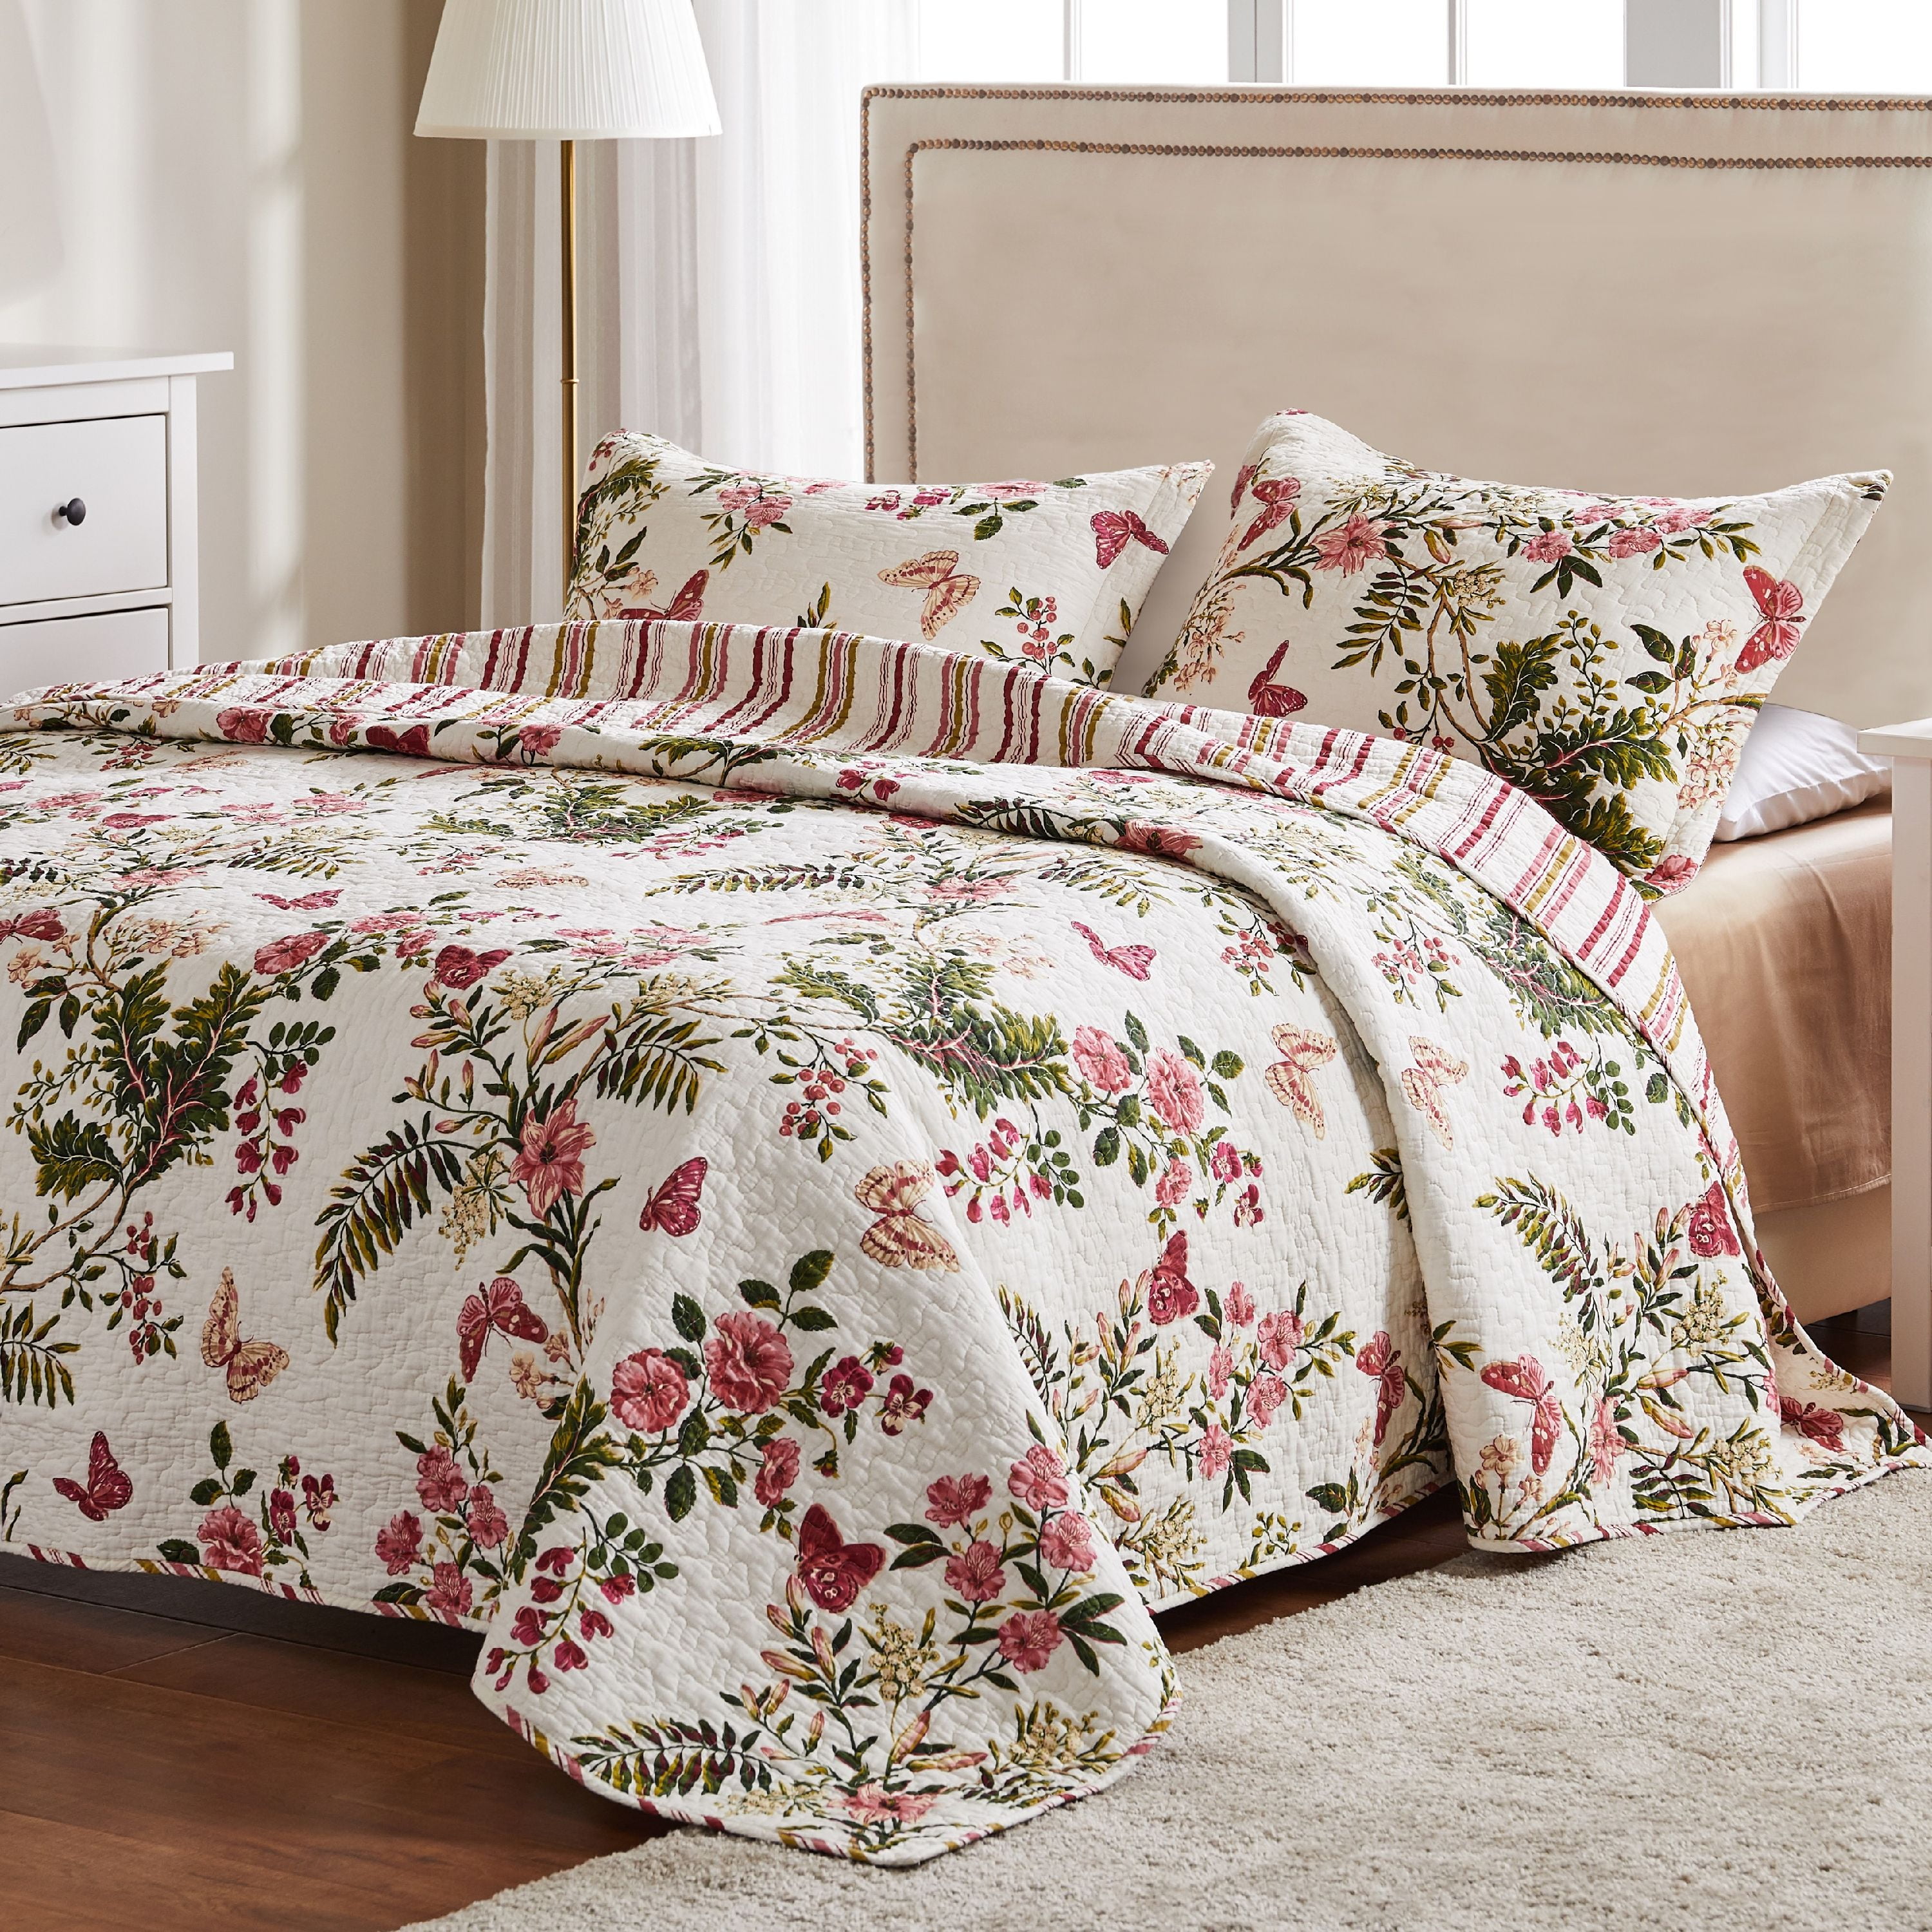 Details about   Retro Printed Quilt Set  Bed Cover Quilted Bedspread 100% Cotton Coverlet 3pcs 